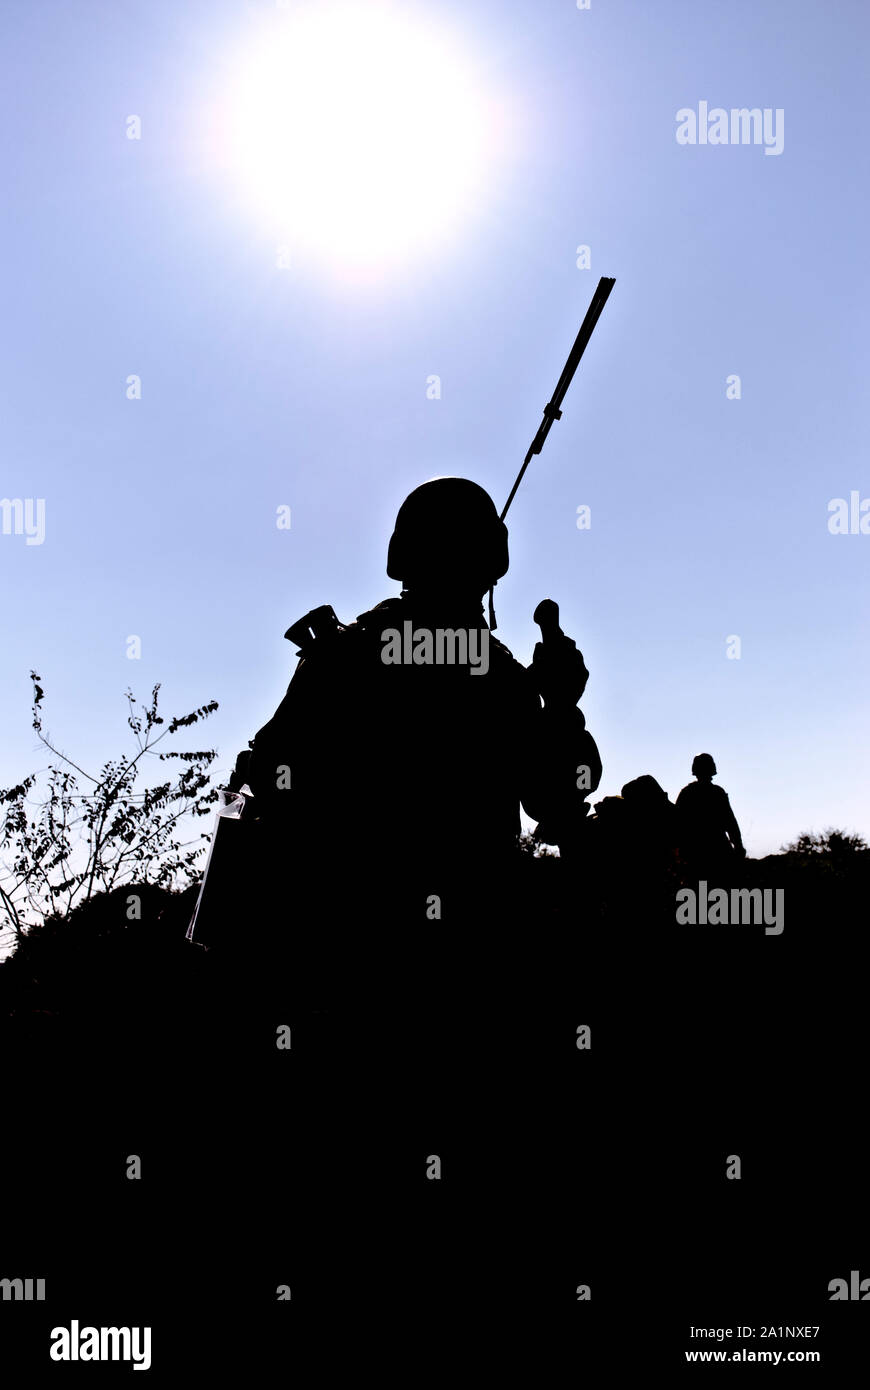 A silhouette of the military person on a background of the sun Stock Photo